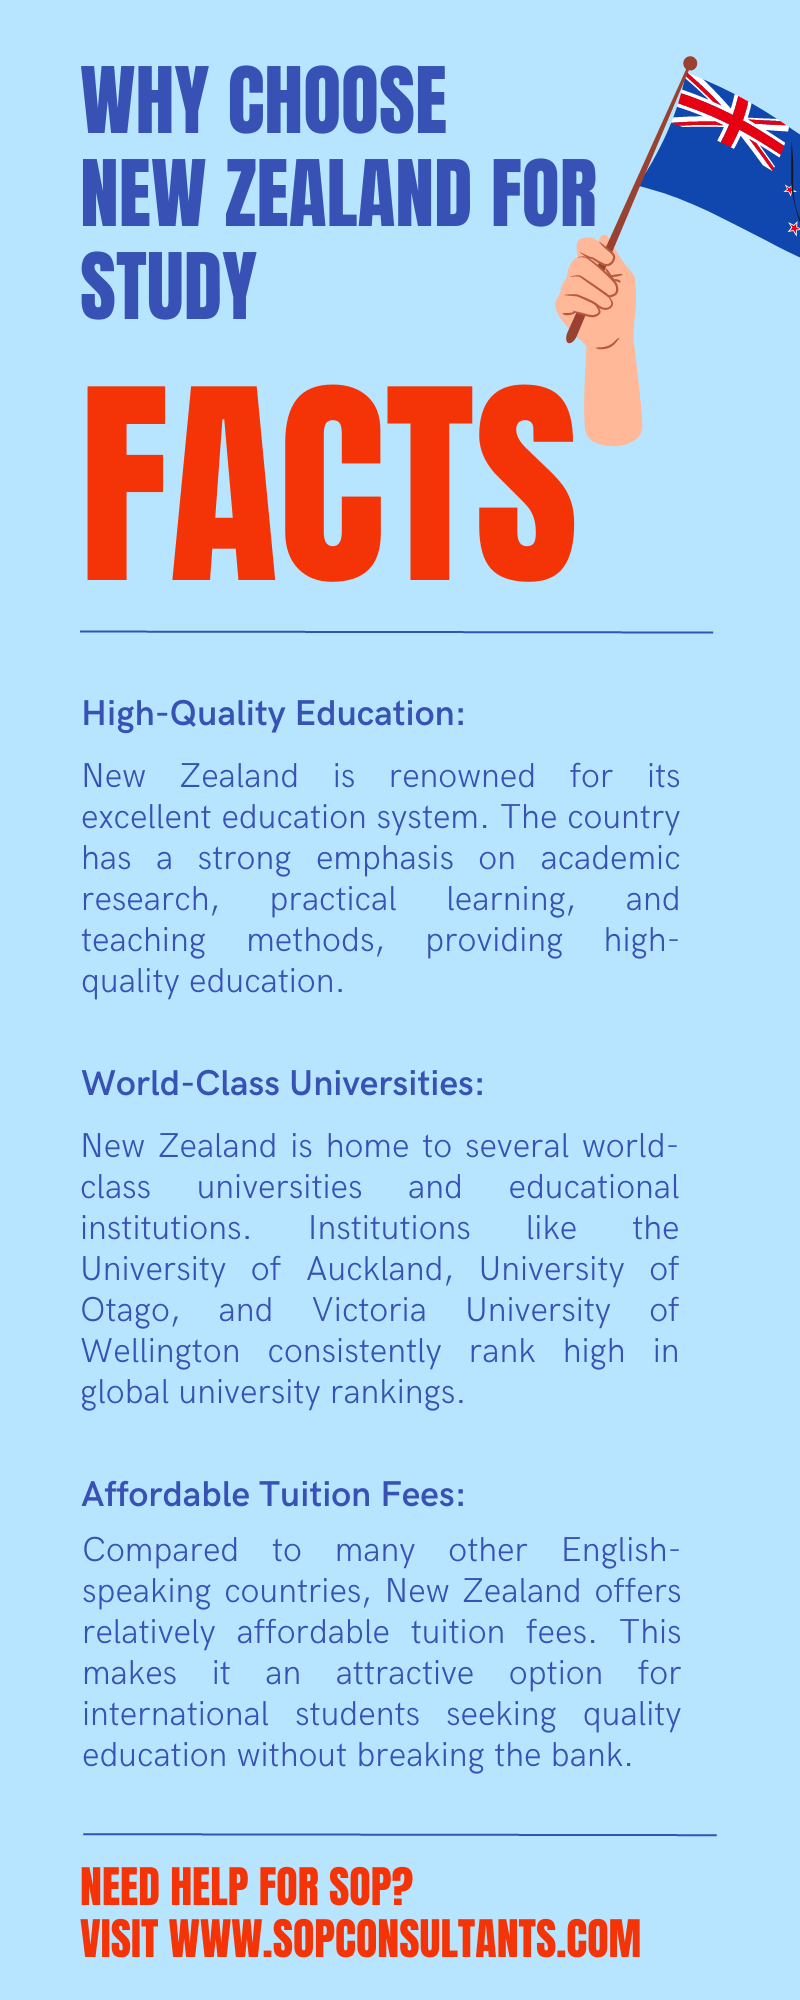 SOP For New Zealand Student Visa - Why choose New Zealand For Higher Studies